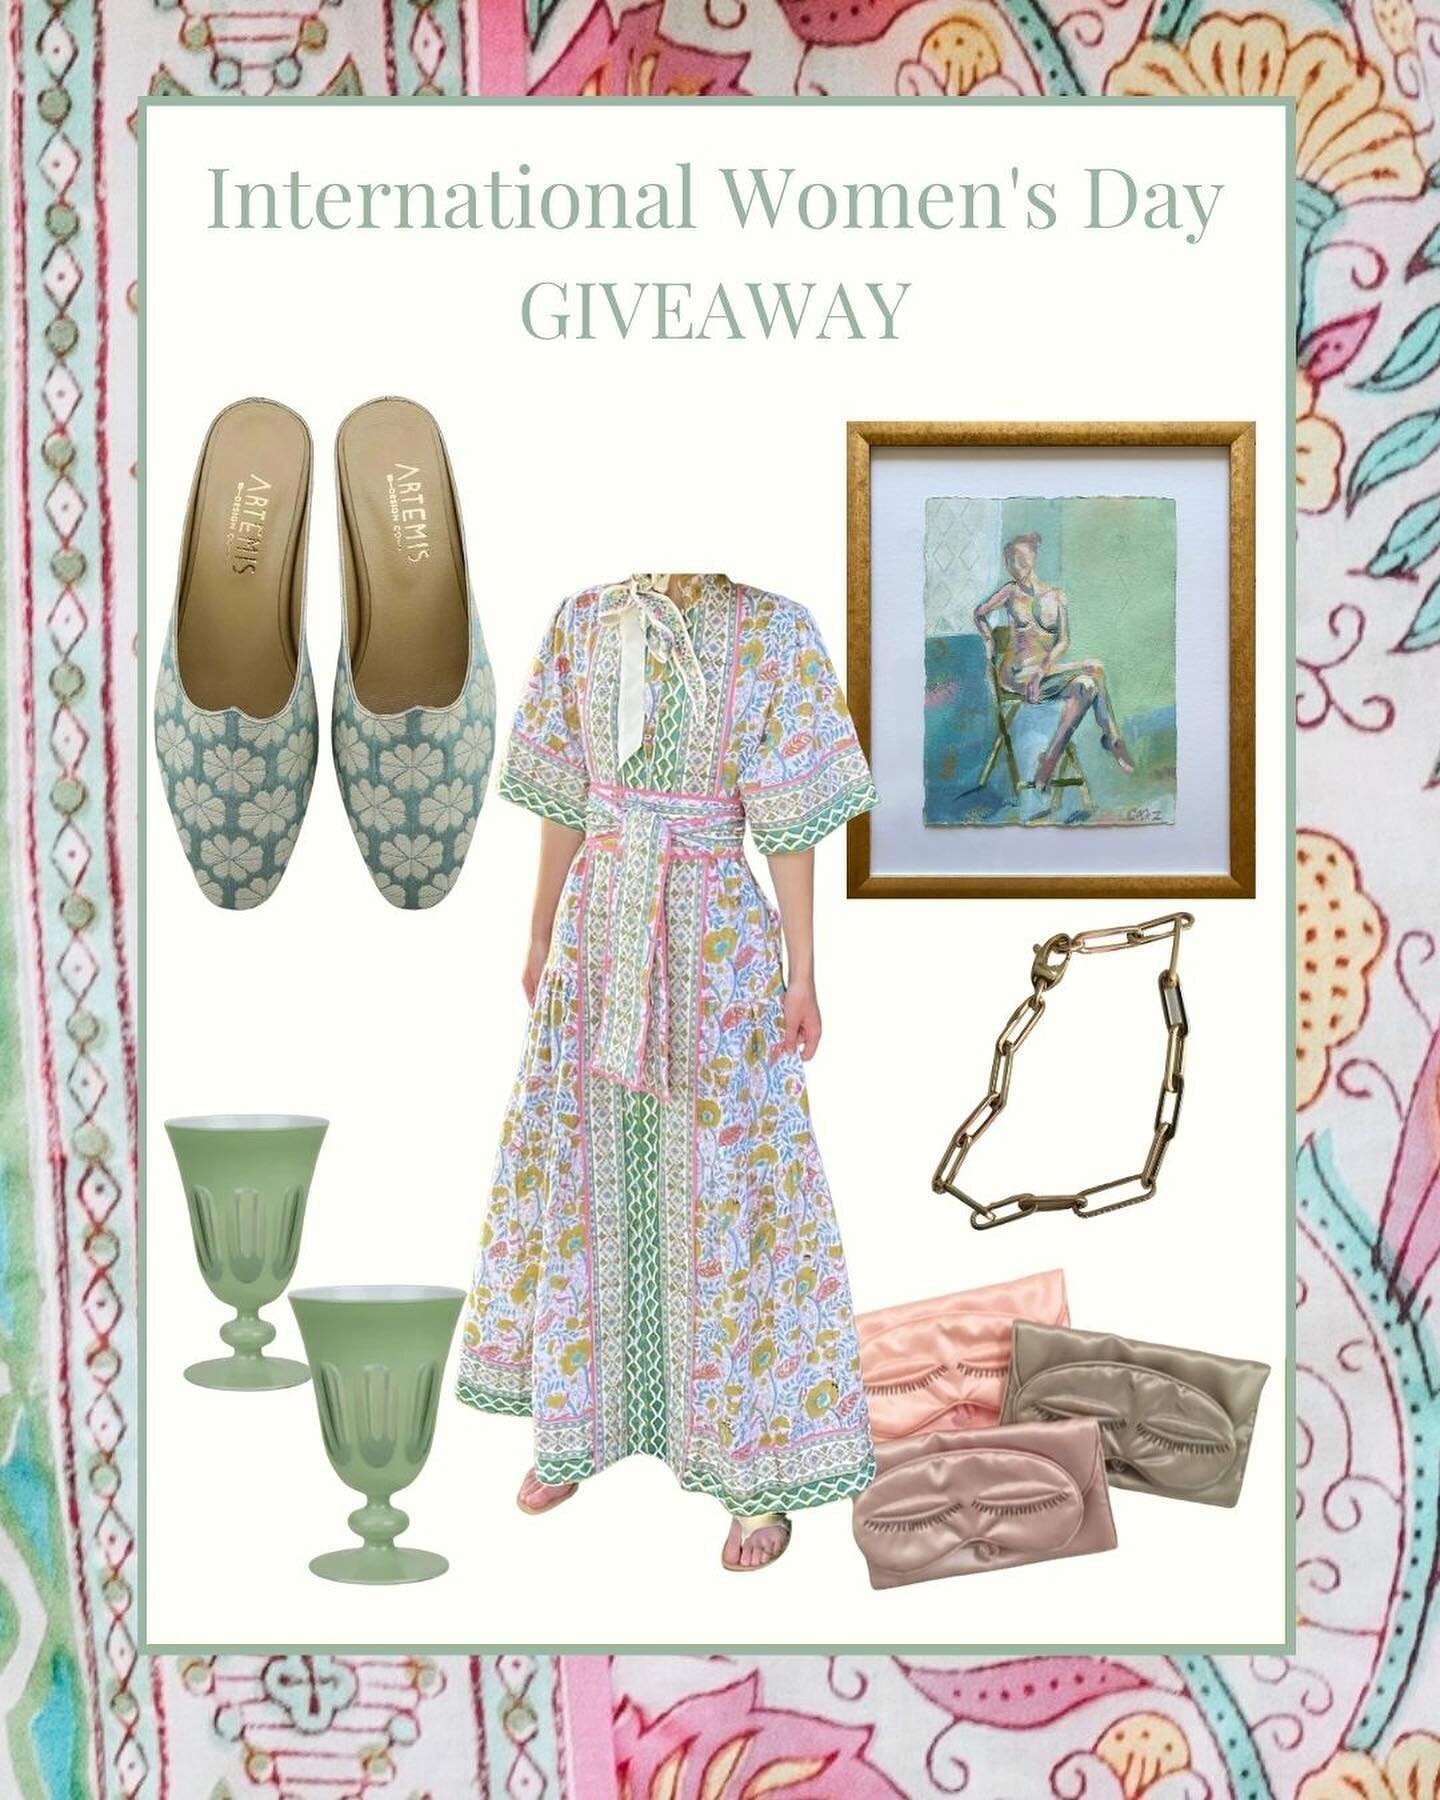 [giveaway closed] 🌟 It&rsquo;s International Women&rsquo;s Day 🌟which calls for a GIVEAWAY!!!✨

During this week, we want to celebrate the contributions women have made to society by giving you the chance to win some AMAZING items from some fab fem